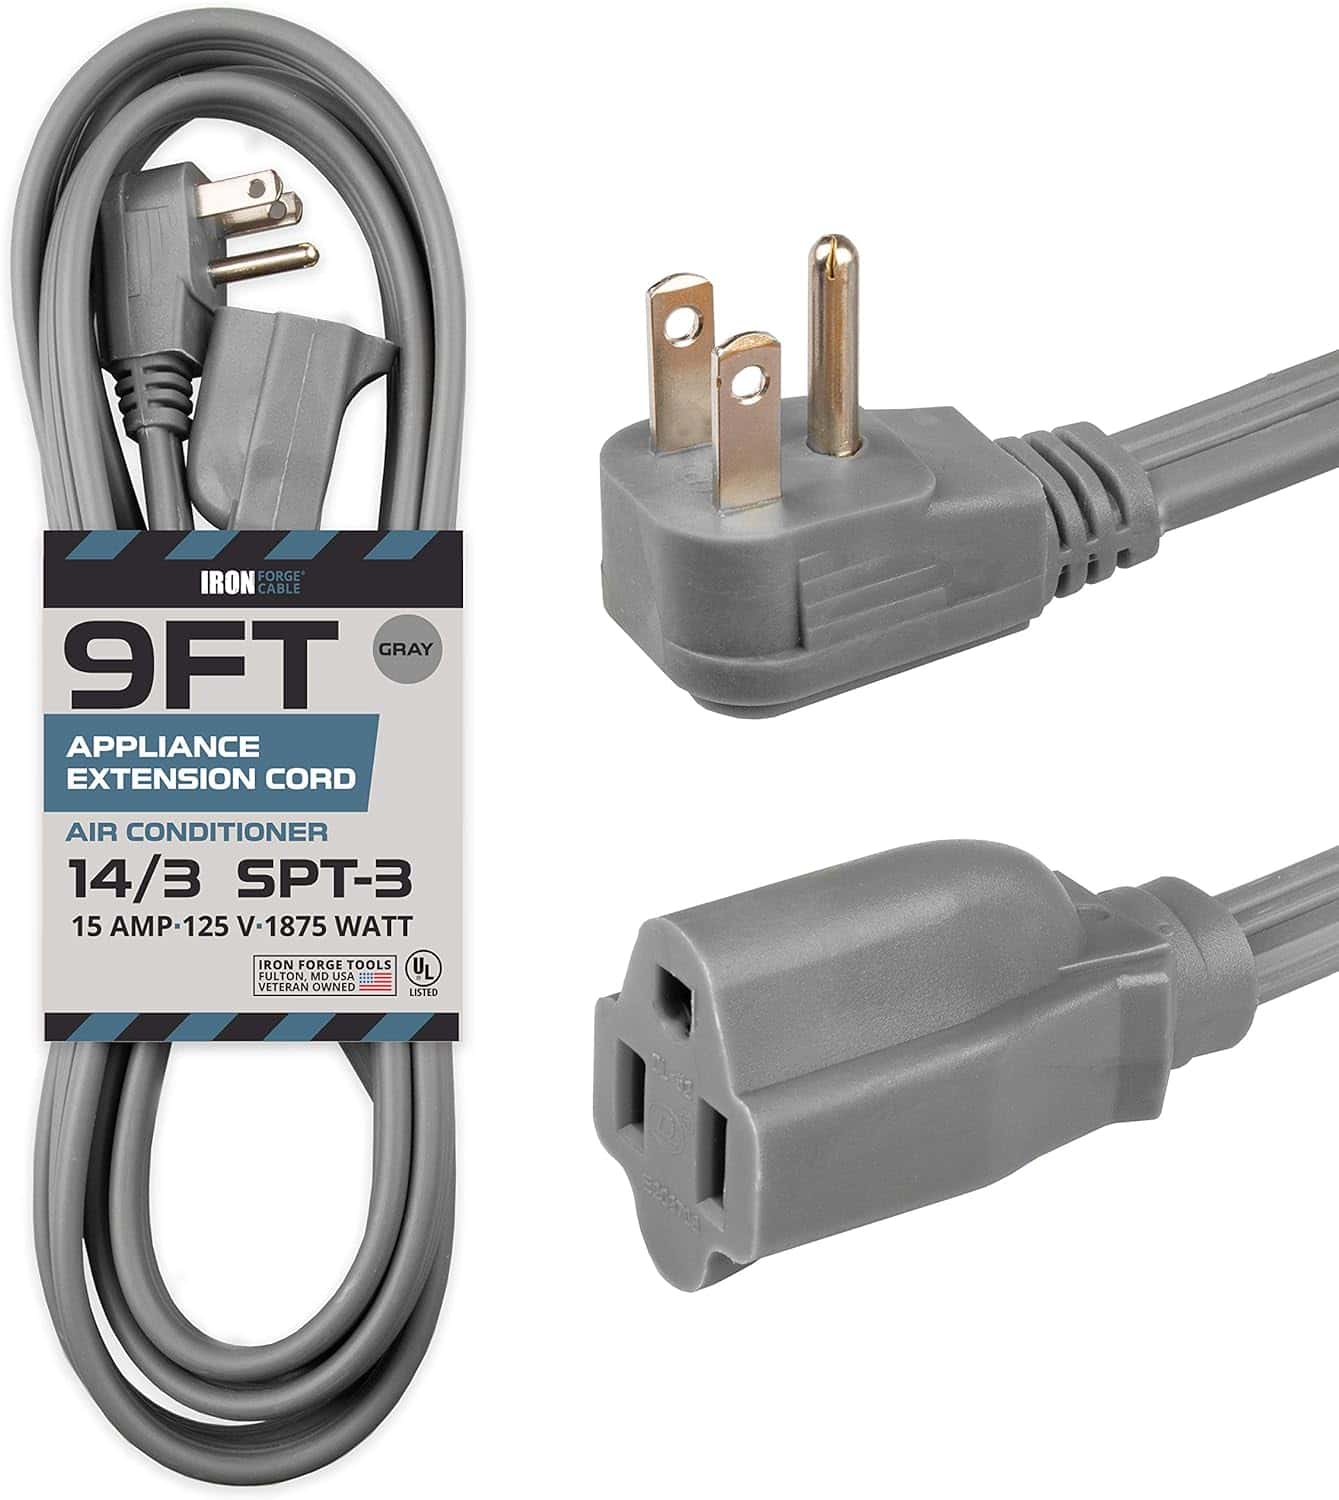 9-Ft-Appliance-Extension-Cord-Heavy-Duty-Gray-14-Gauge-3-Prong-SPT-3-Cable-for-Air-Conditioner-or-Refrigerator